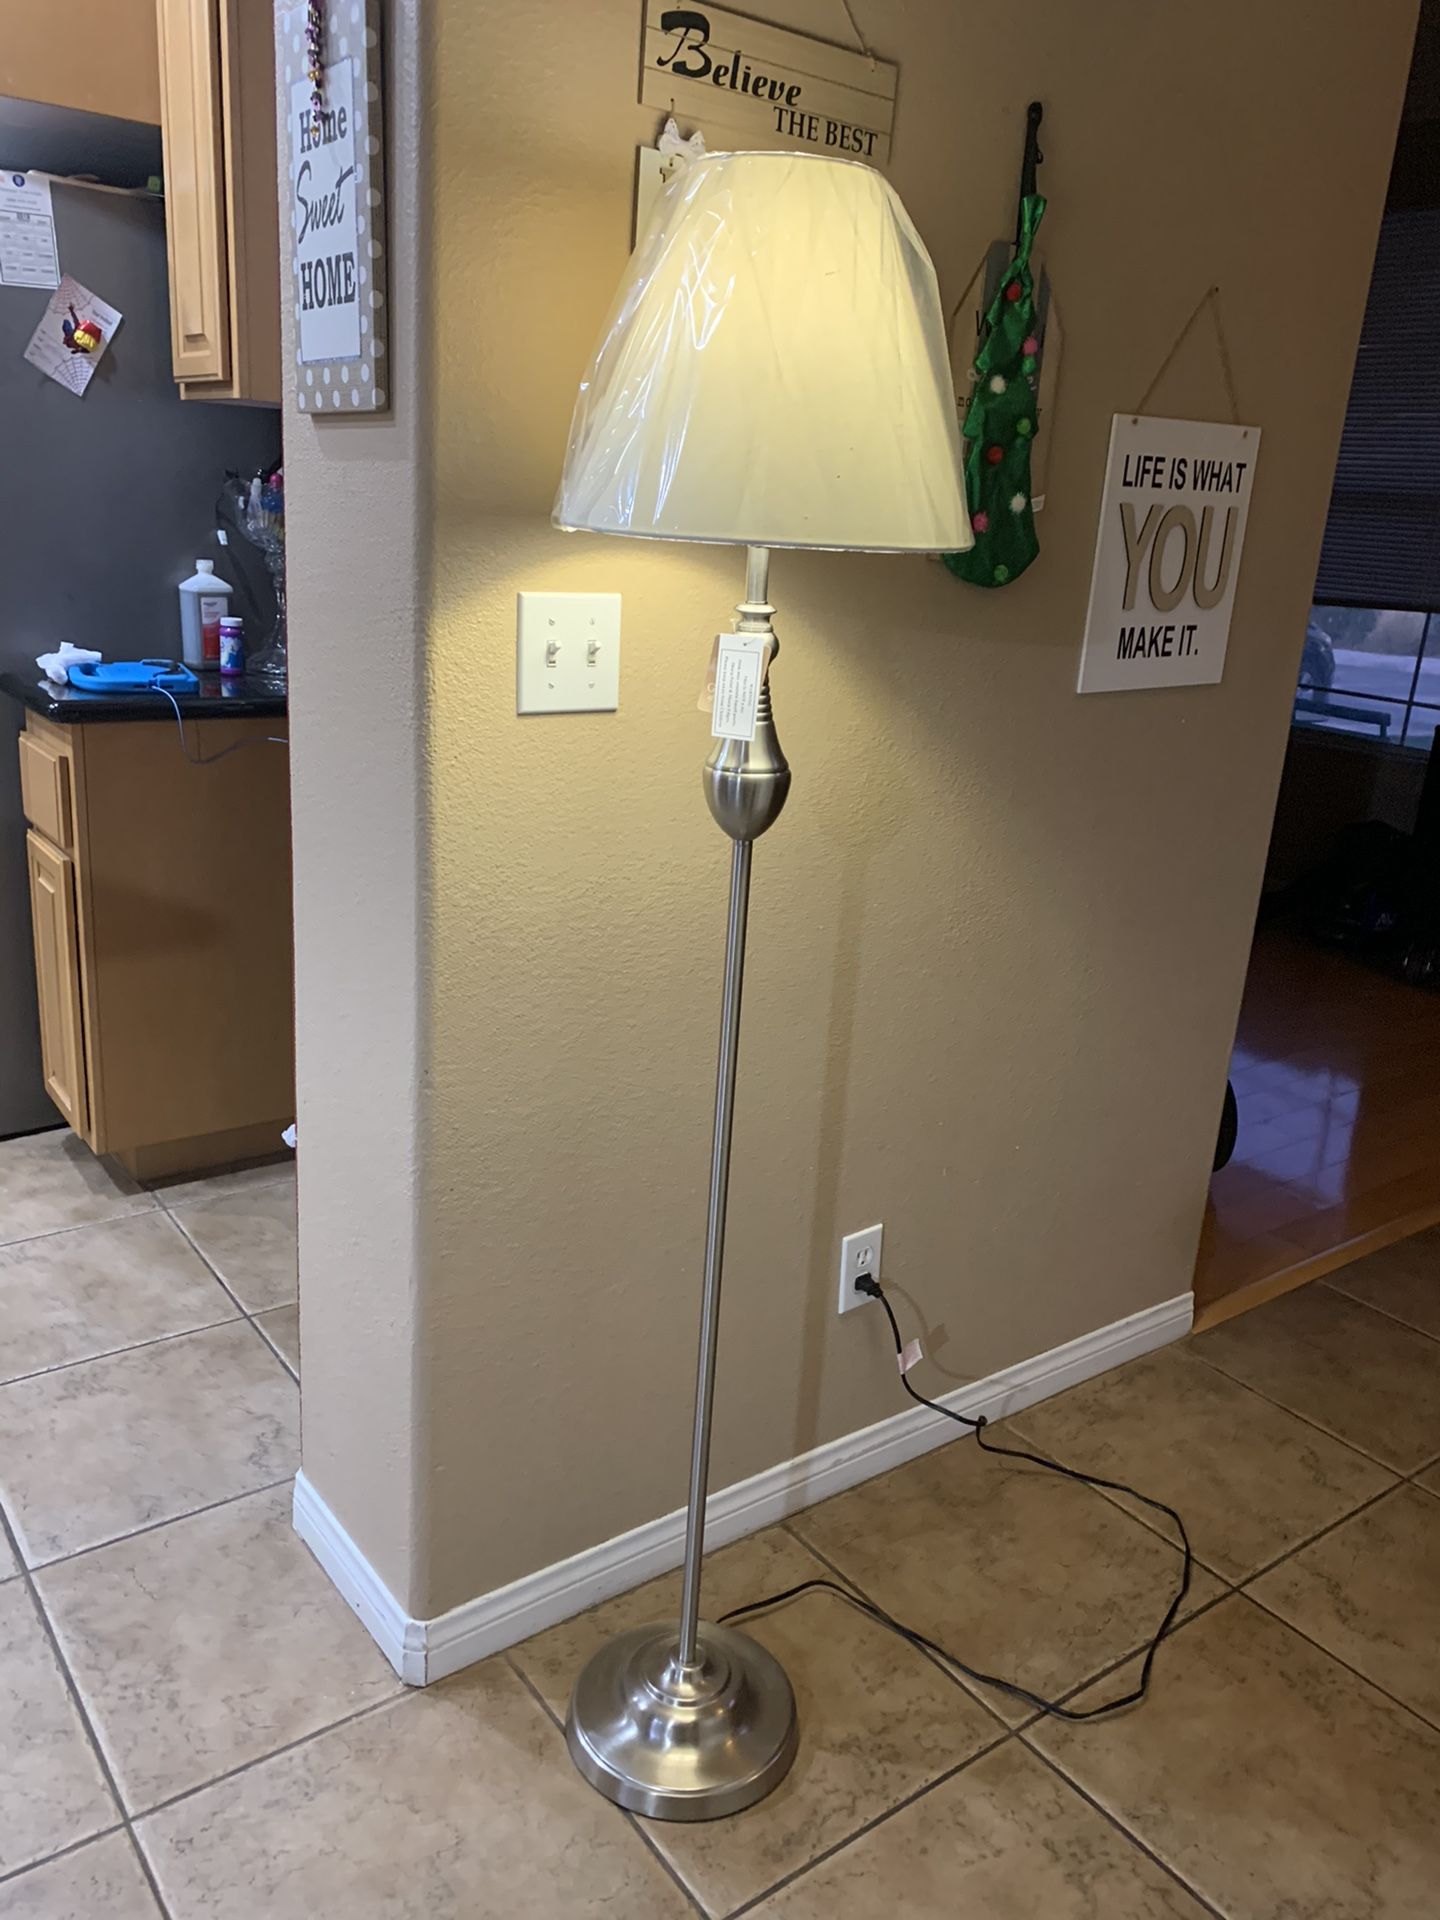 Floor lamp 62 inches high $25 brand new